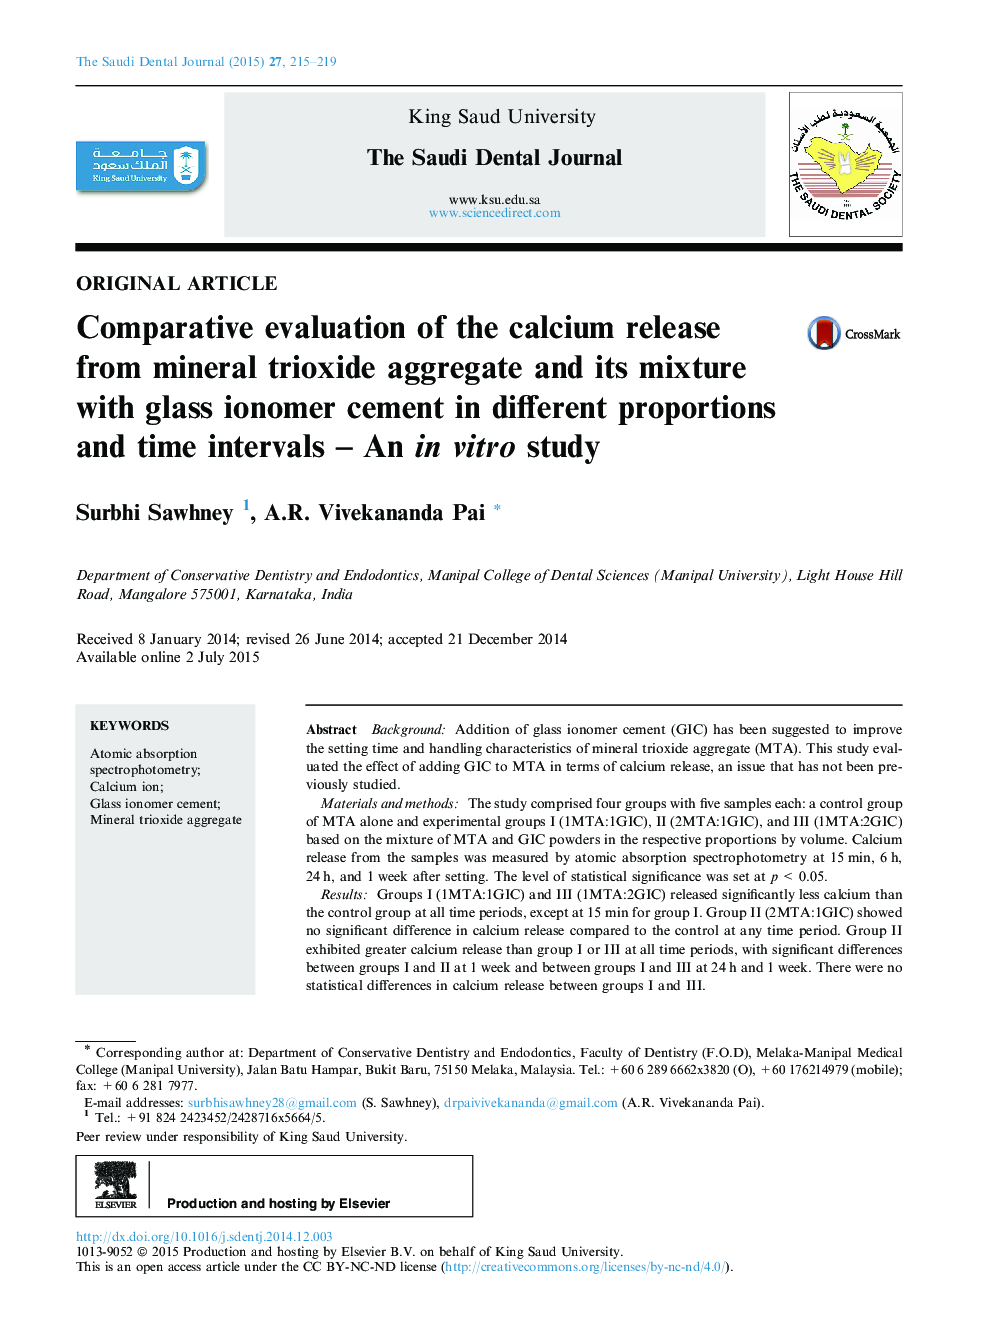 Comparative evaluation of the calcium release from mineral trioxide aggregate and its mixture with glass ionomer cement in different proportions and time intervals – An in vitro study 